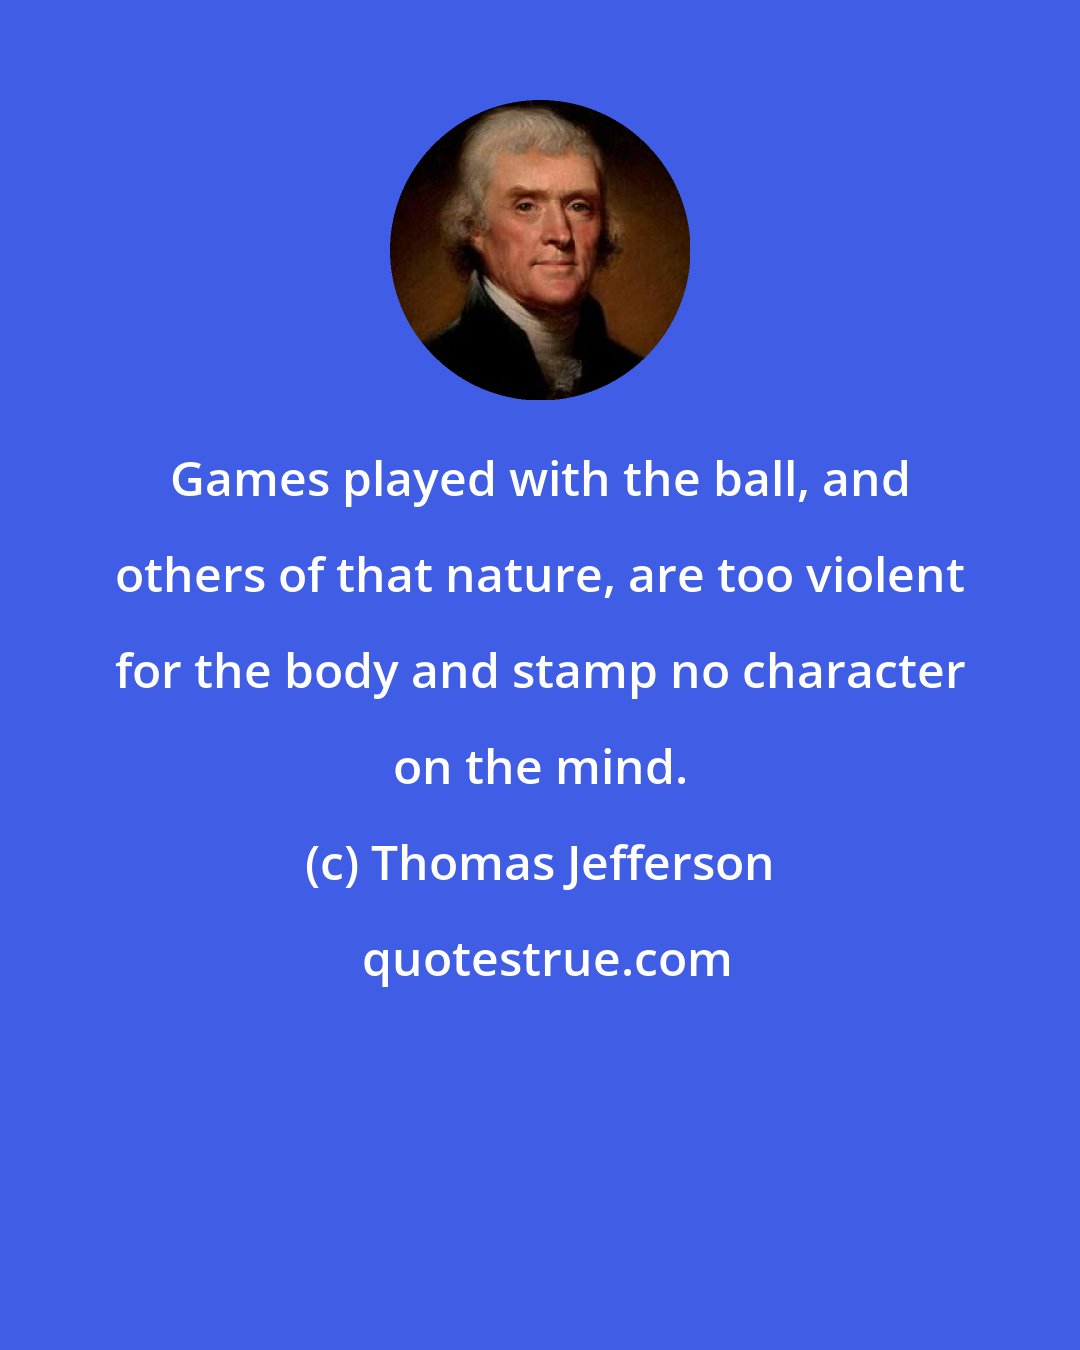 Thomas Jefferson: Games played with the ball, and others of that nature, are too violent for the body and stamp no character on the mind.